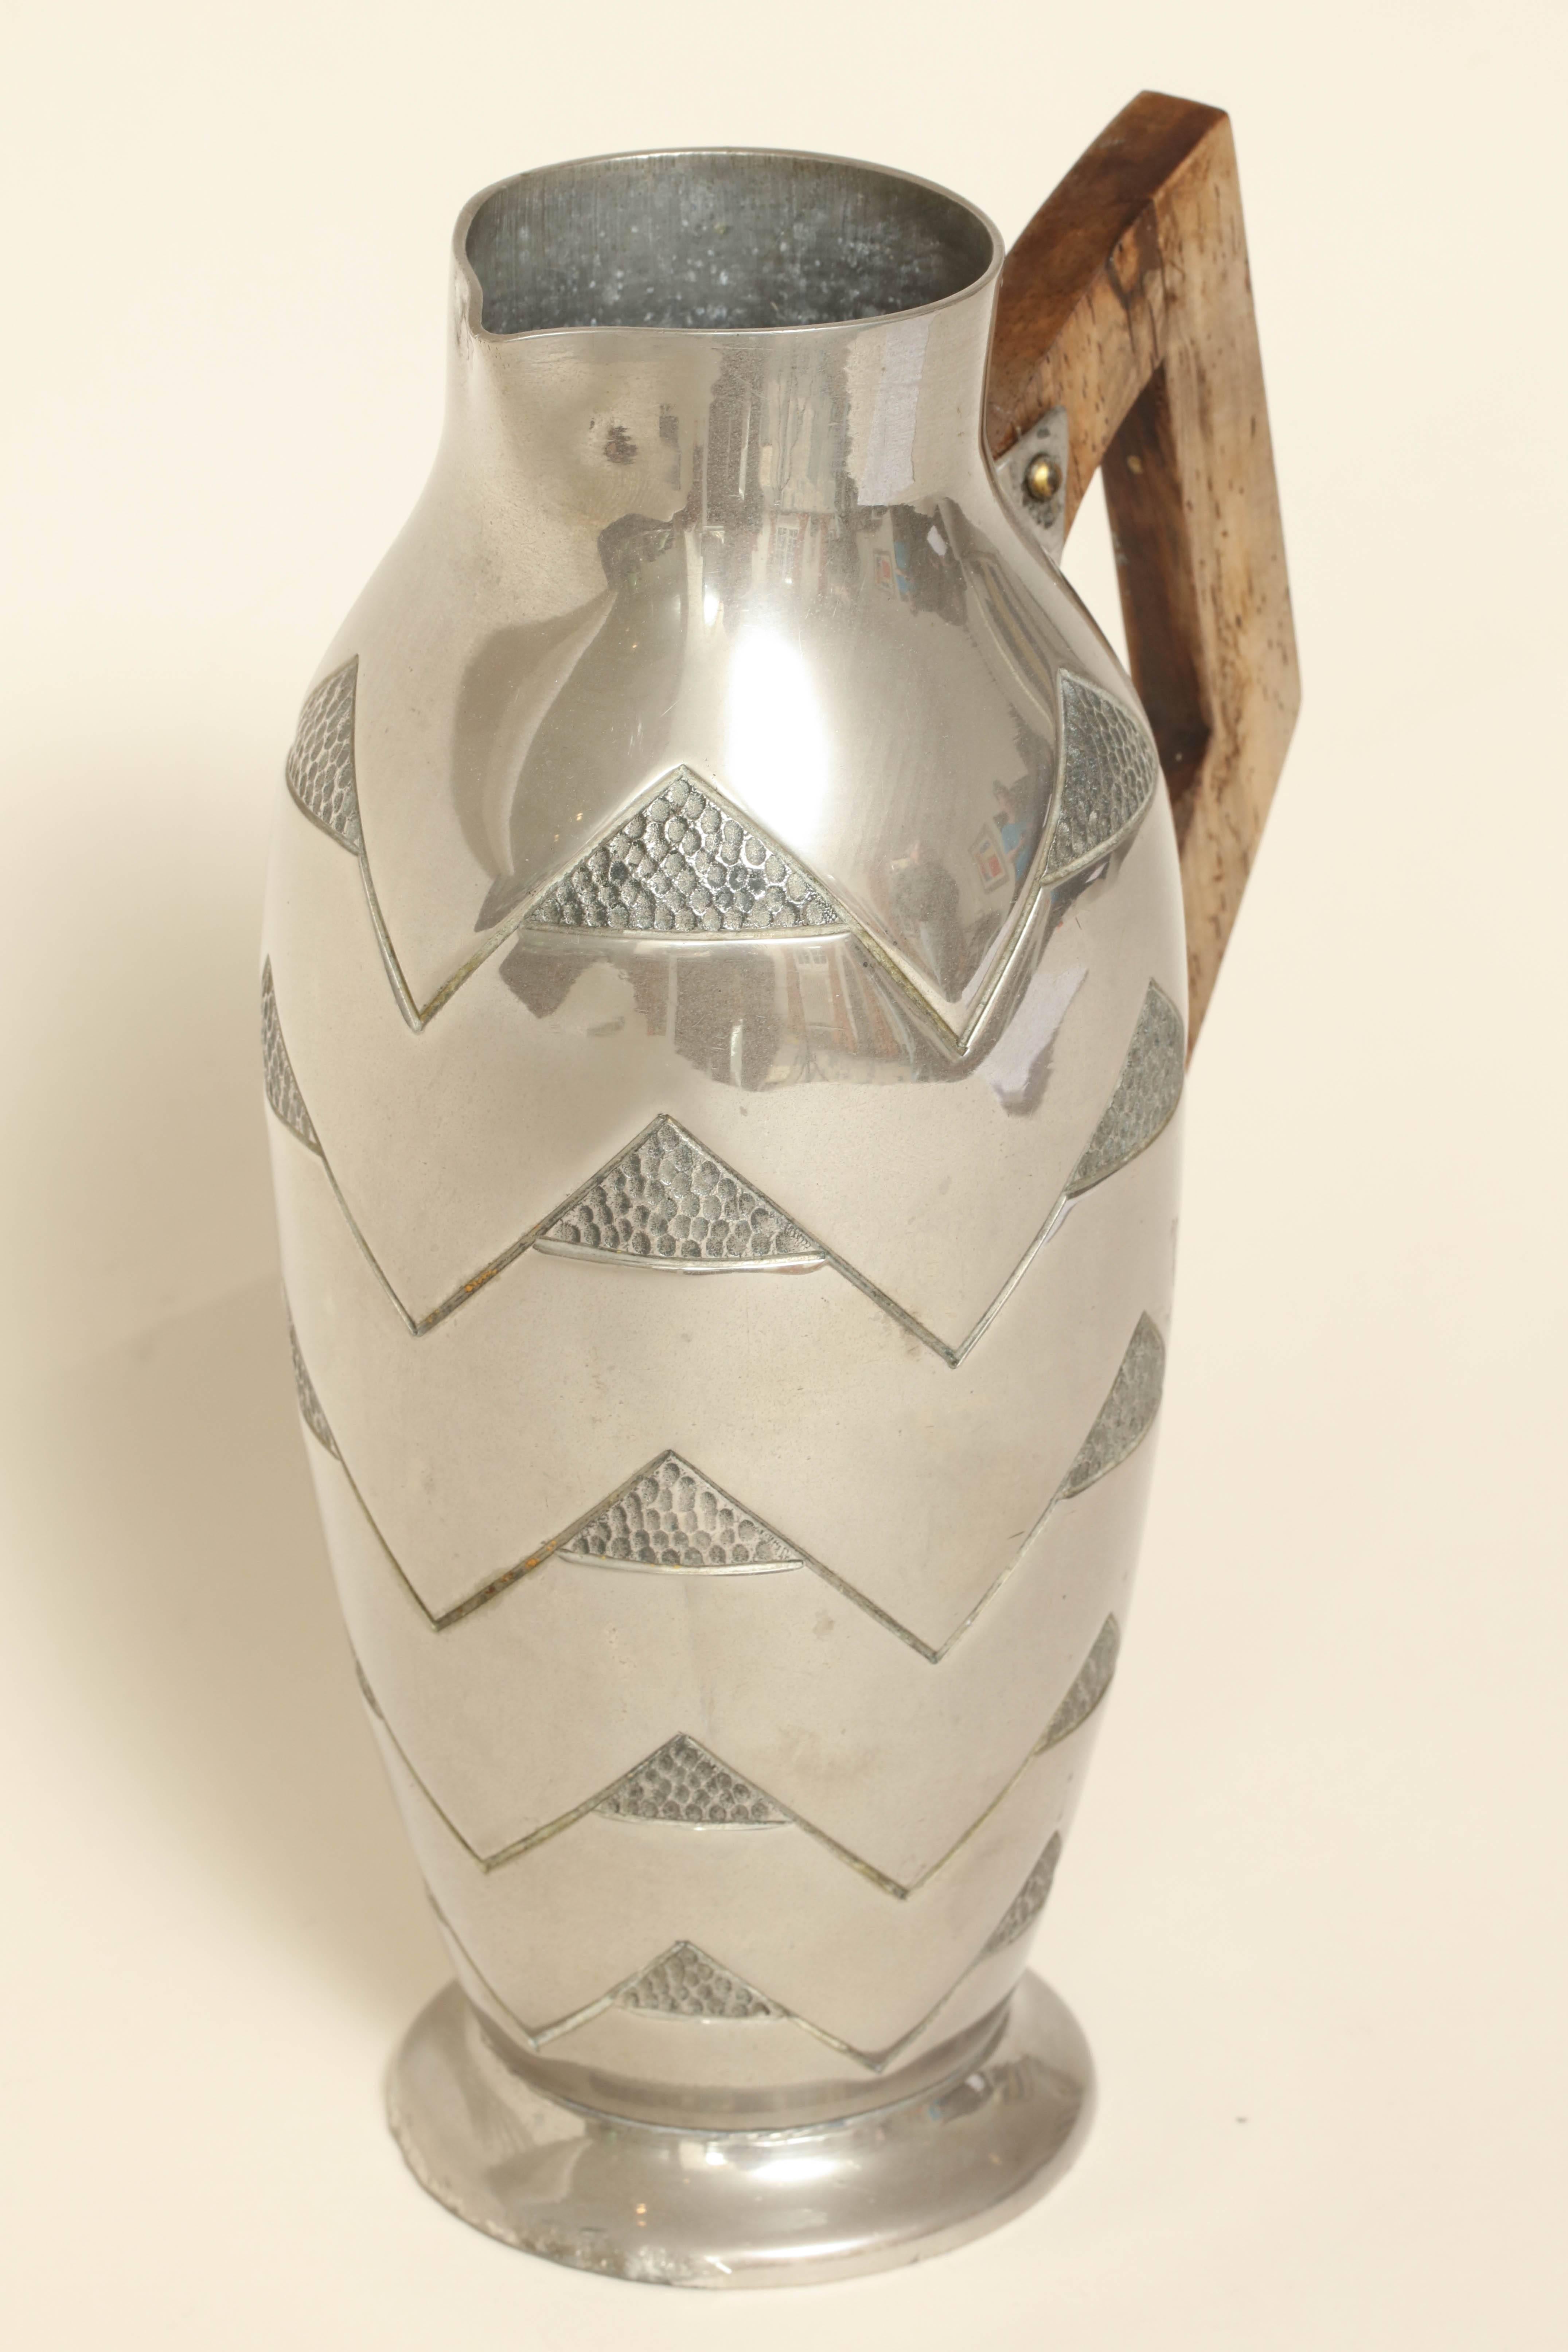 Measures: 8 7/8'' high; 5'' wide; 3 ½'' long

Hand-wrought dinanderie pewter pitcher in the mountain pattern with an angled wood handle.

Signed R. Delavan on the side/ impressed LES ETAINS/ R D underneath.